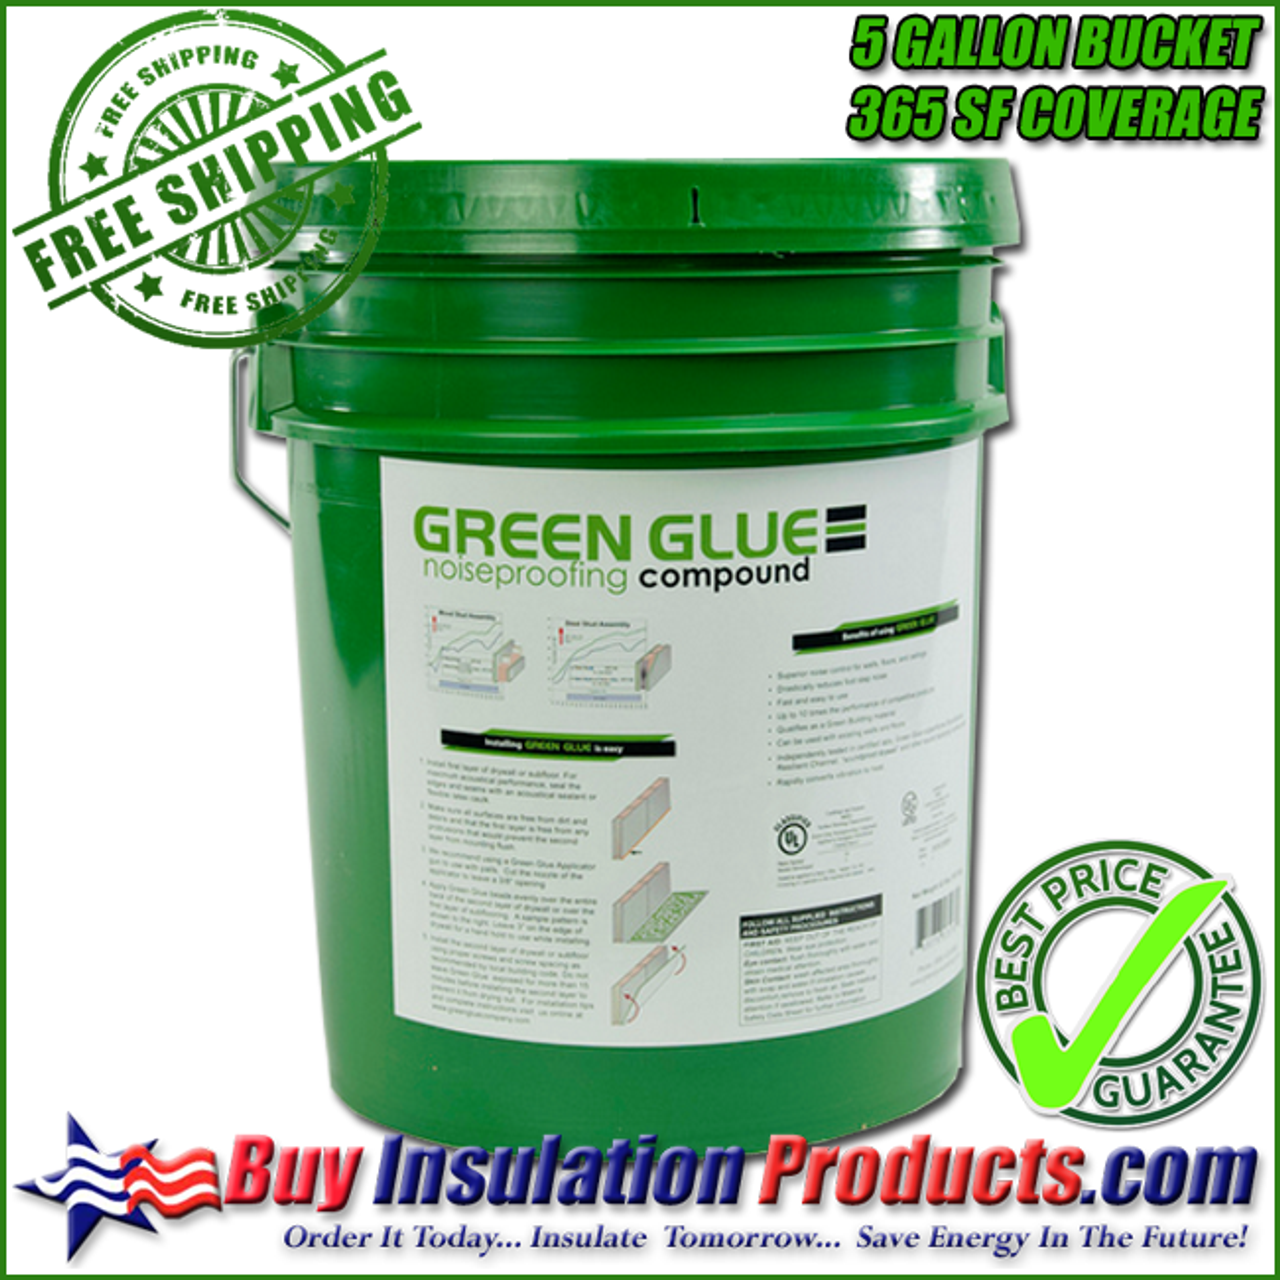 Green Glue Noiseproofing Compound (Pail)